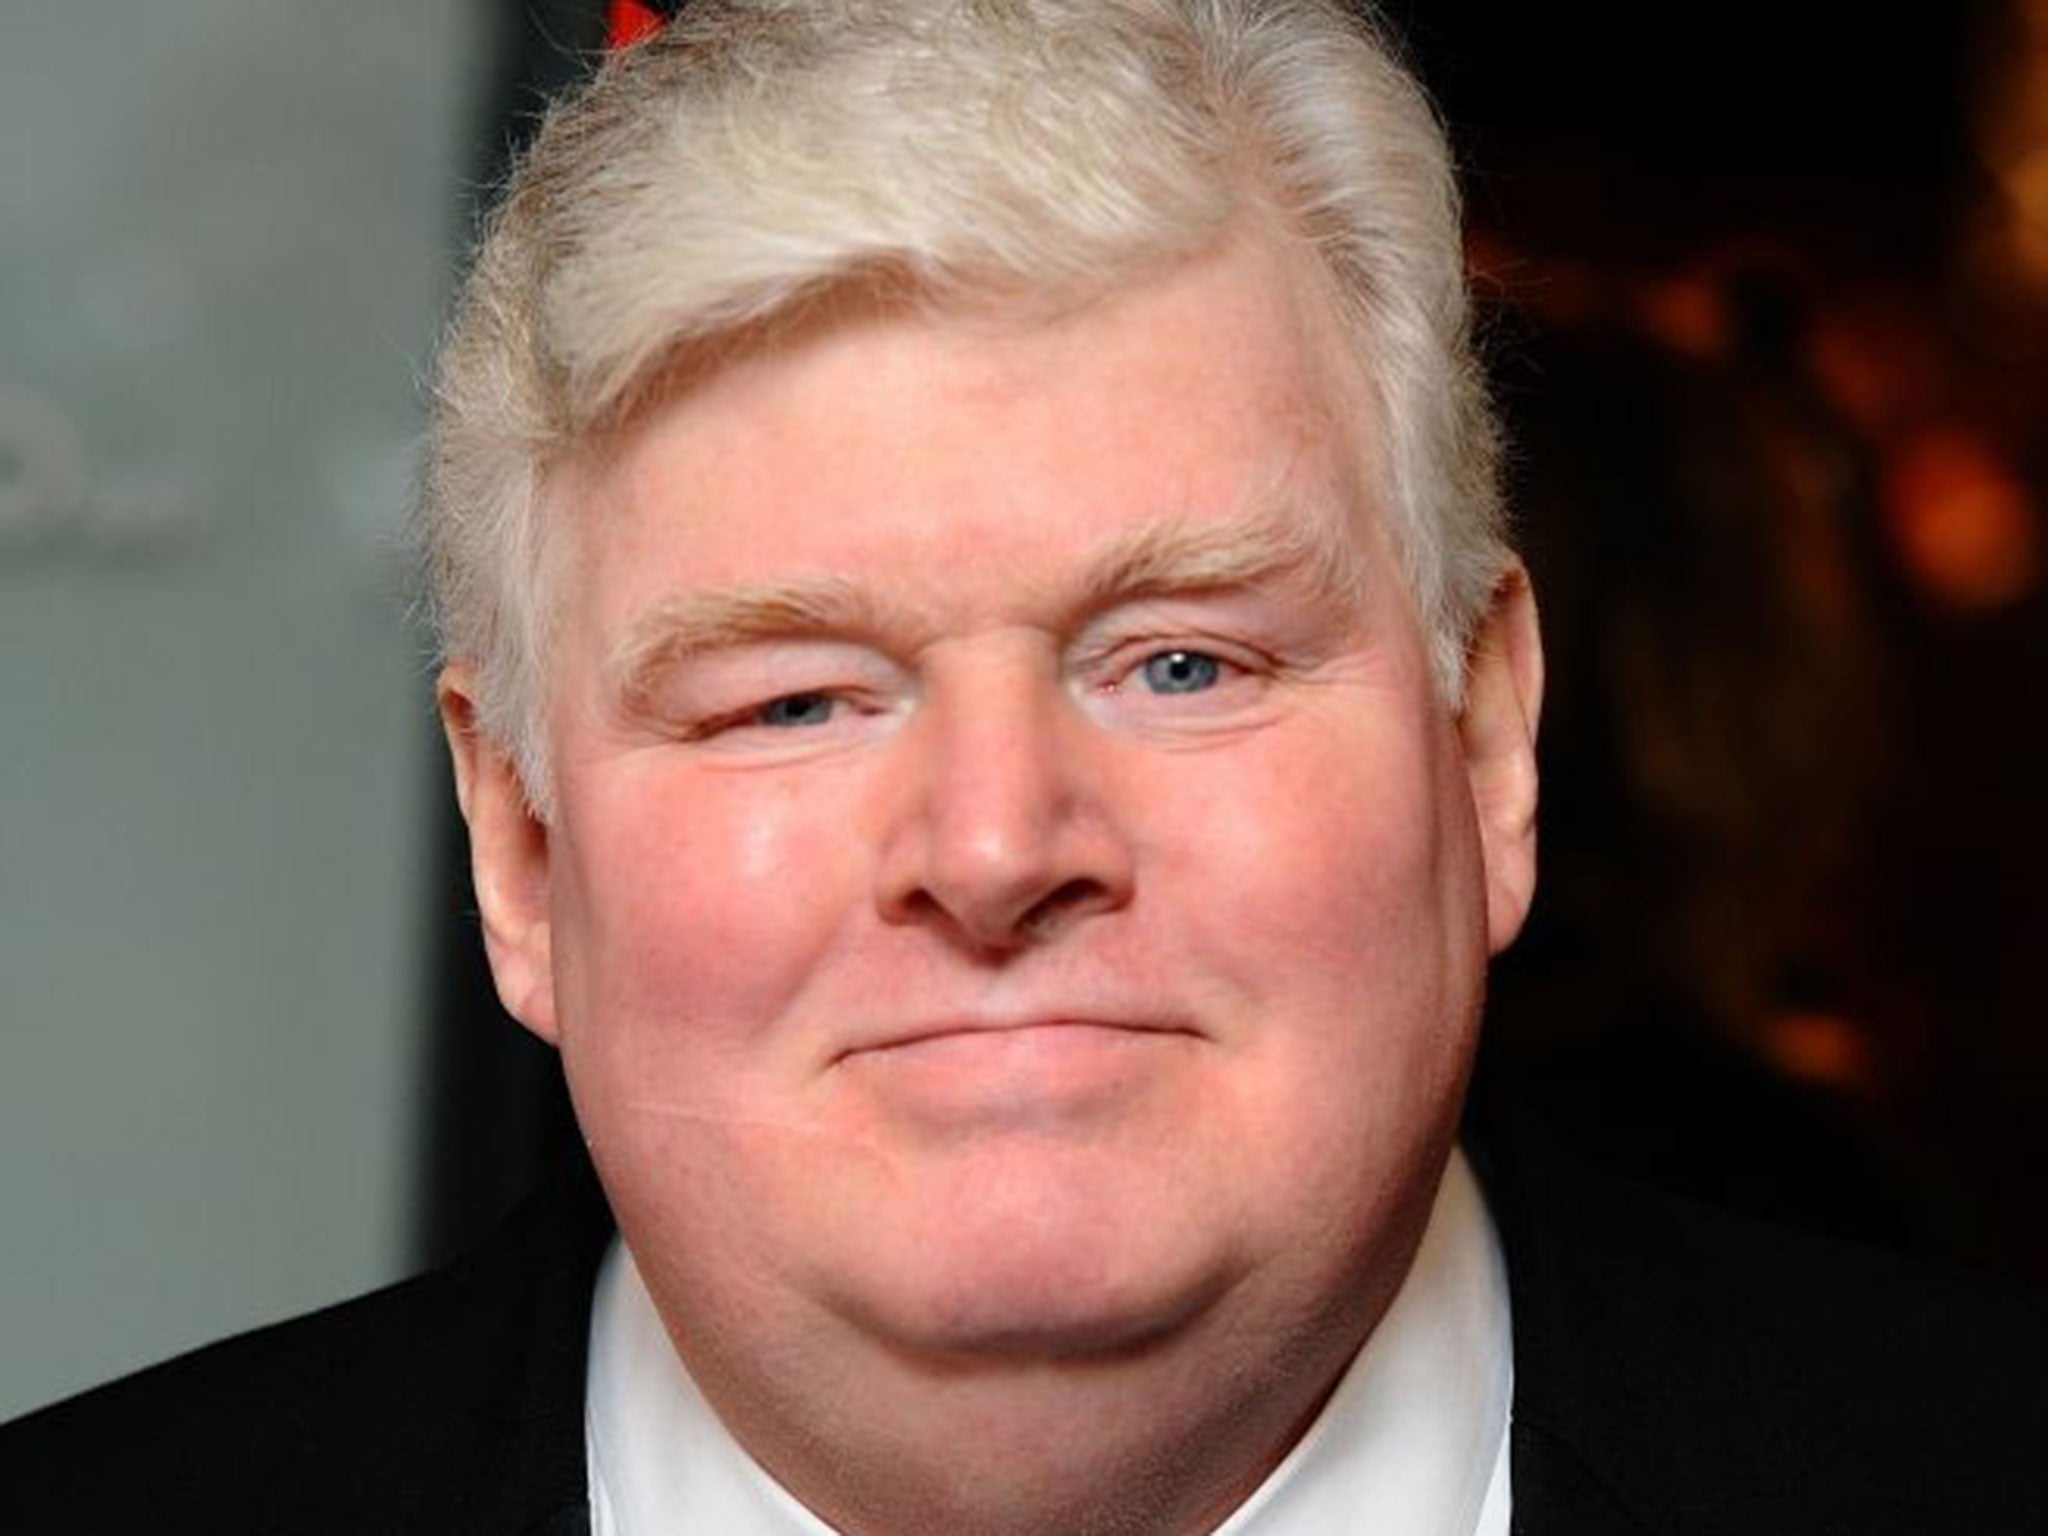 Kenny Ireland, pictured in 2010.